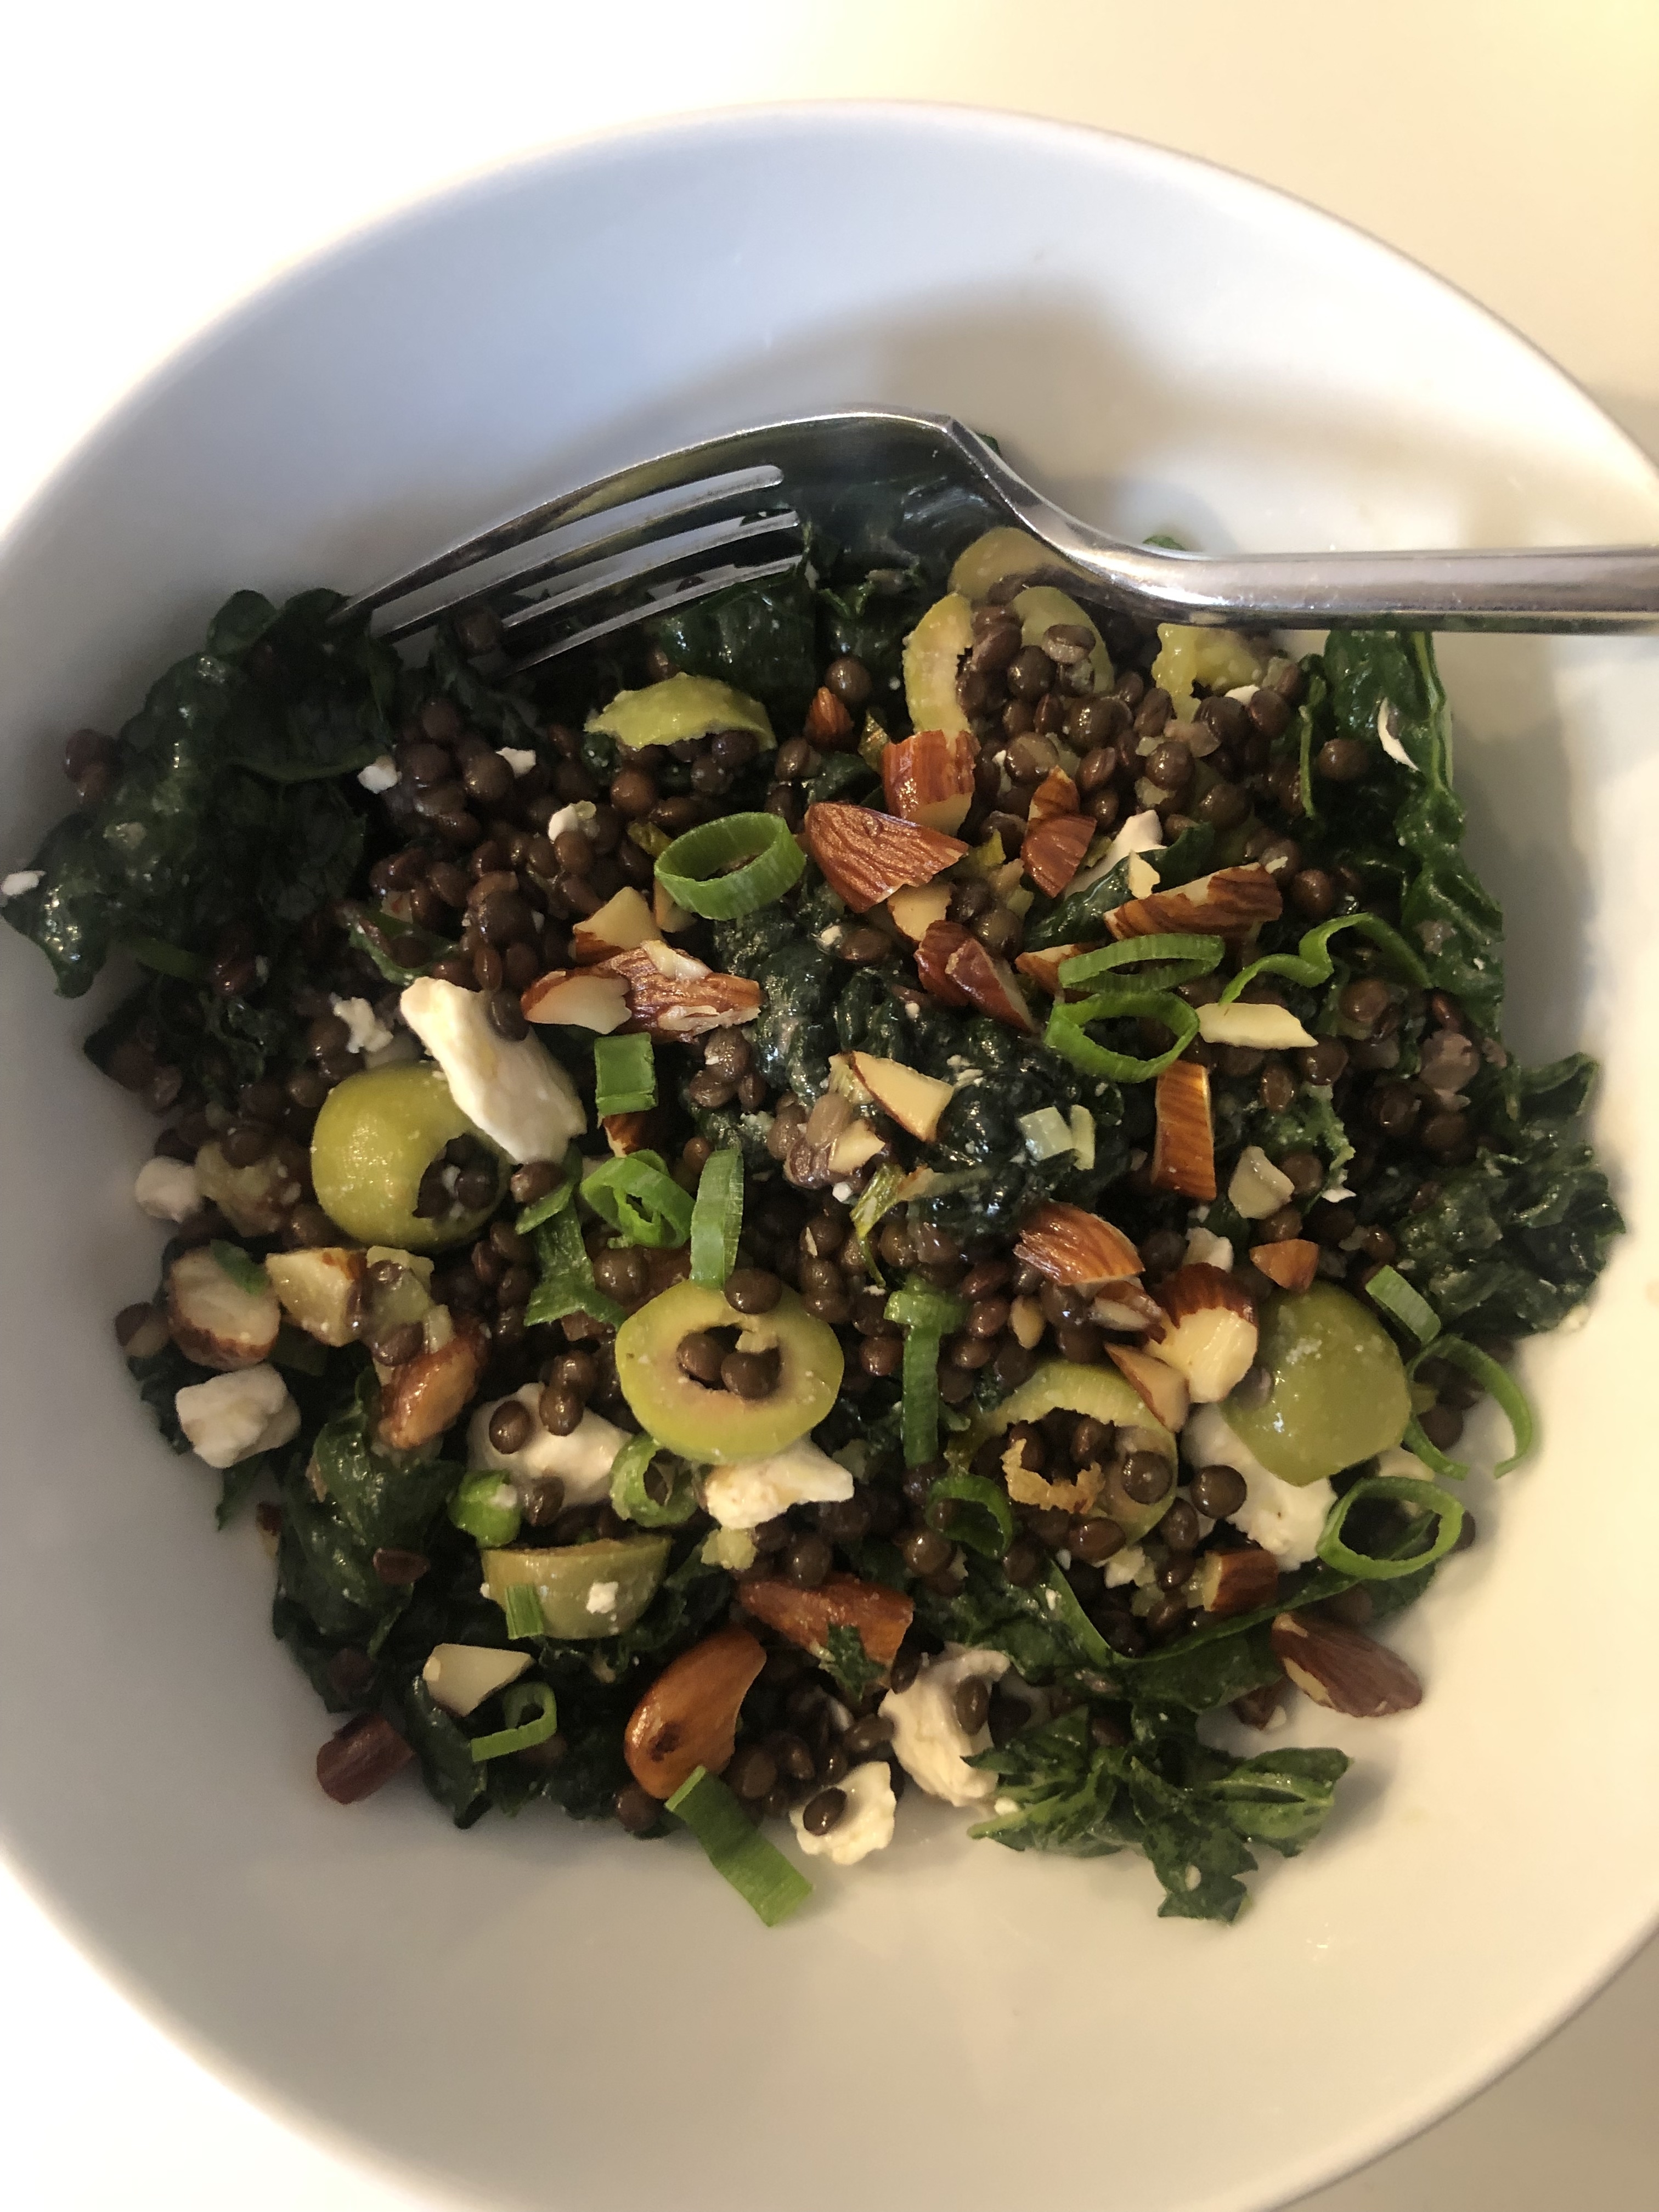 A bowl of lentil salad with kale, nuts, and sliced vegetables, with a fork